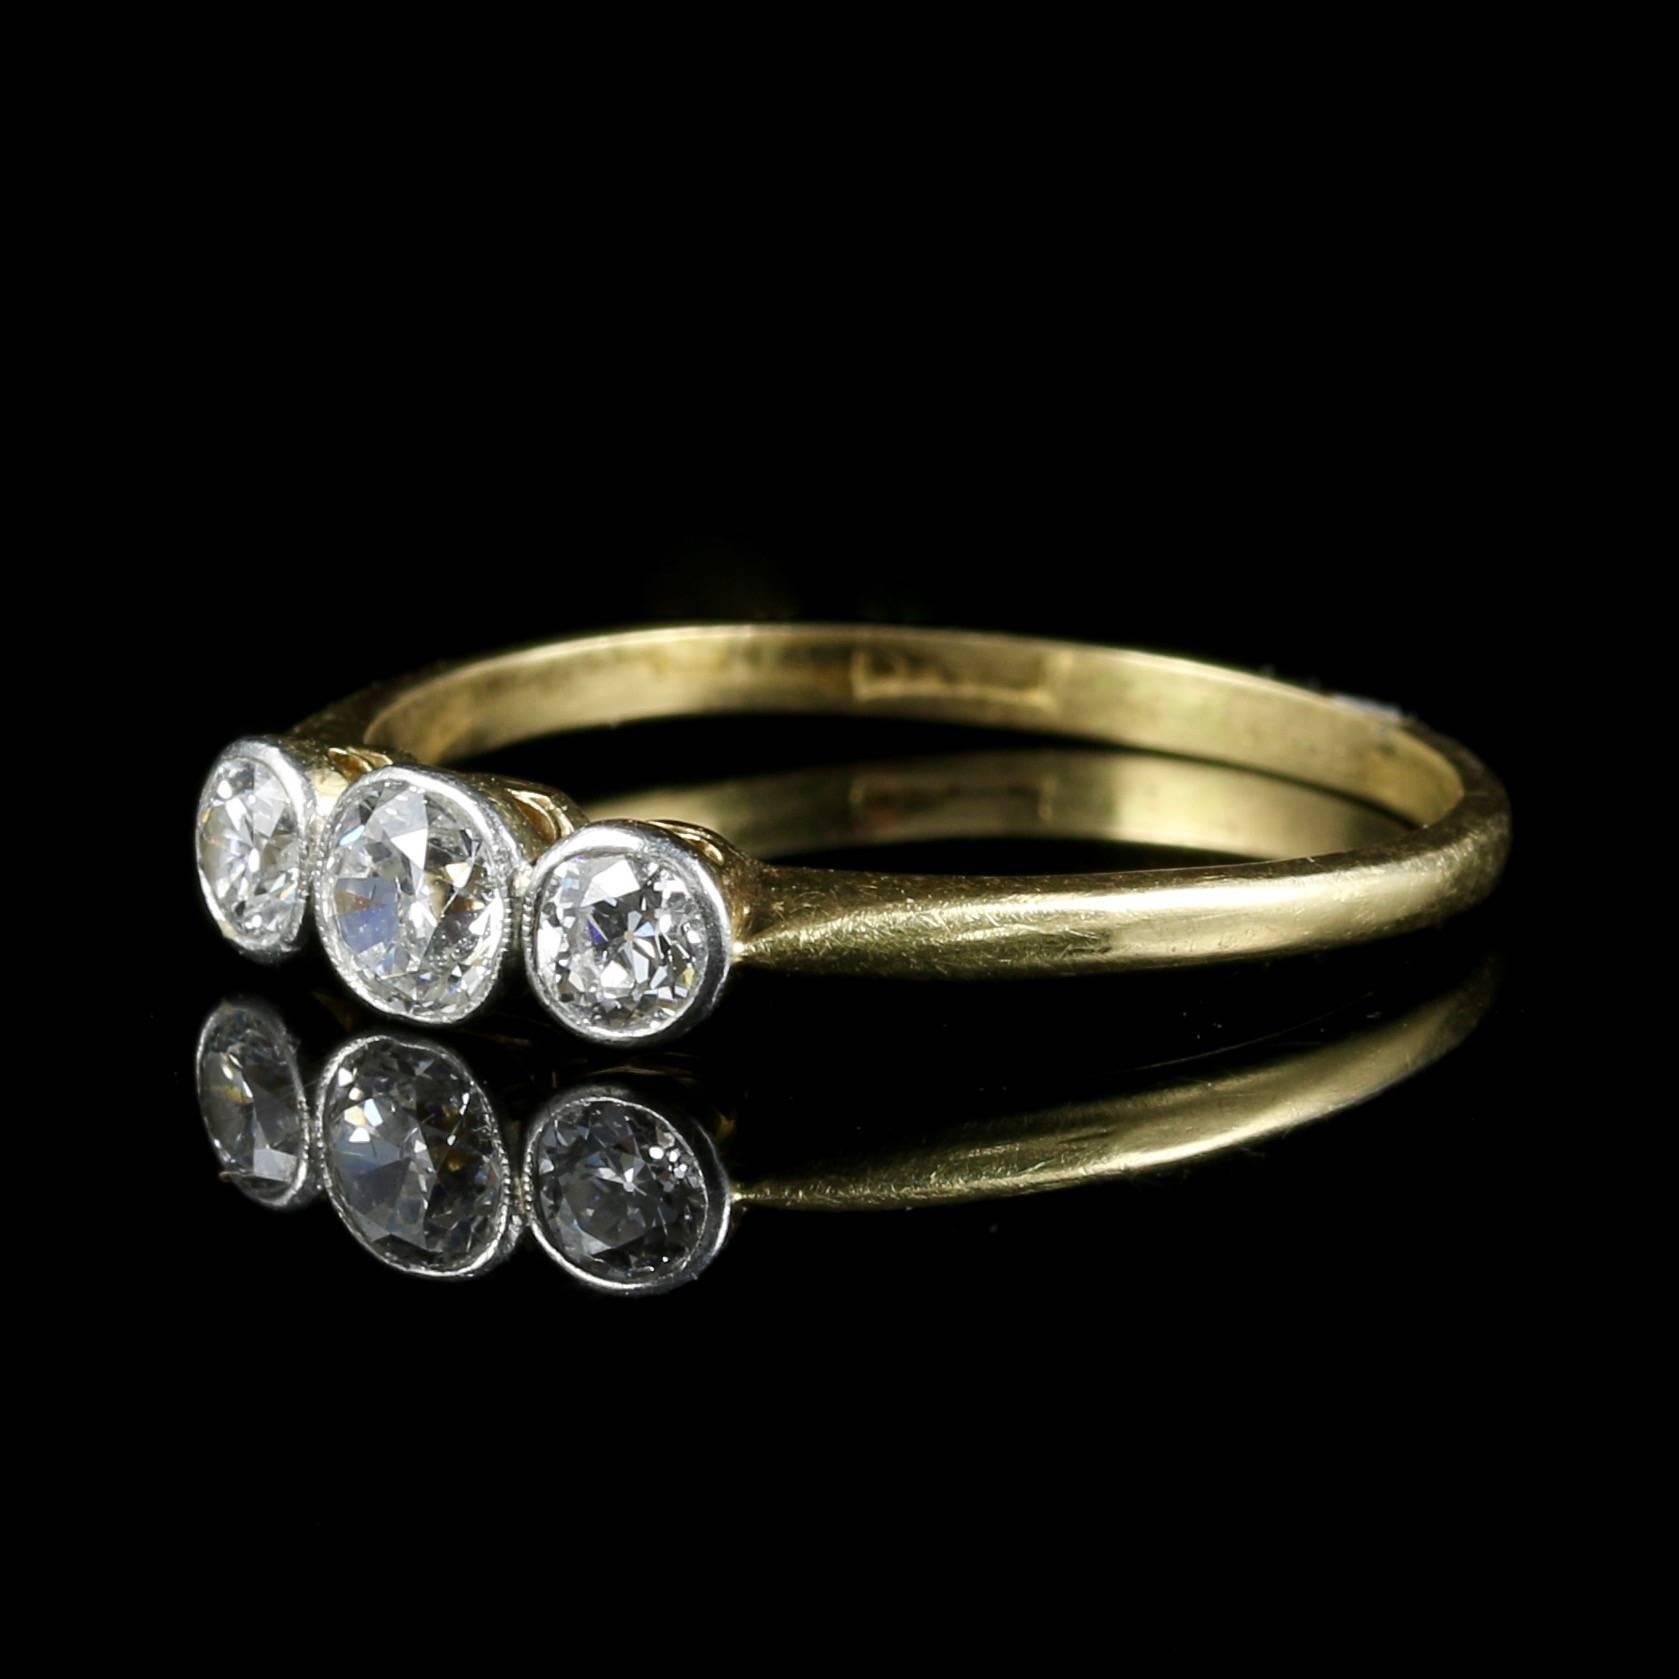 Hallmarked 18ct and pt for platinum.

This ring will make a perfect engagement ring.

The central Diamond is 0.50ct the two outside Diamonds are 0.20ct each, total approx. 0.90ct

The Diamonds are collet set ( no claws ) a beautiful elegant